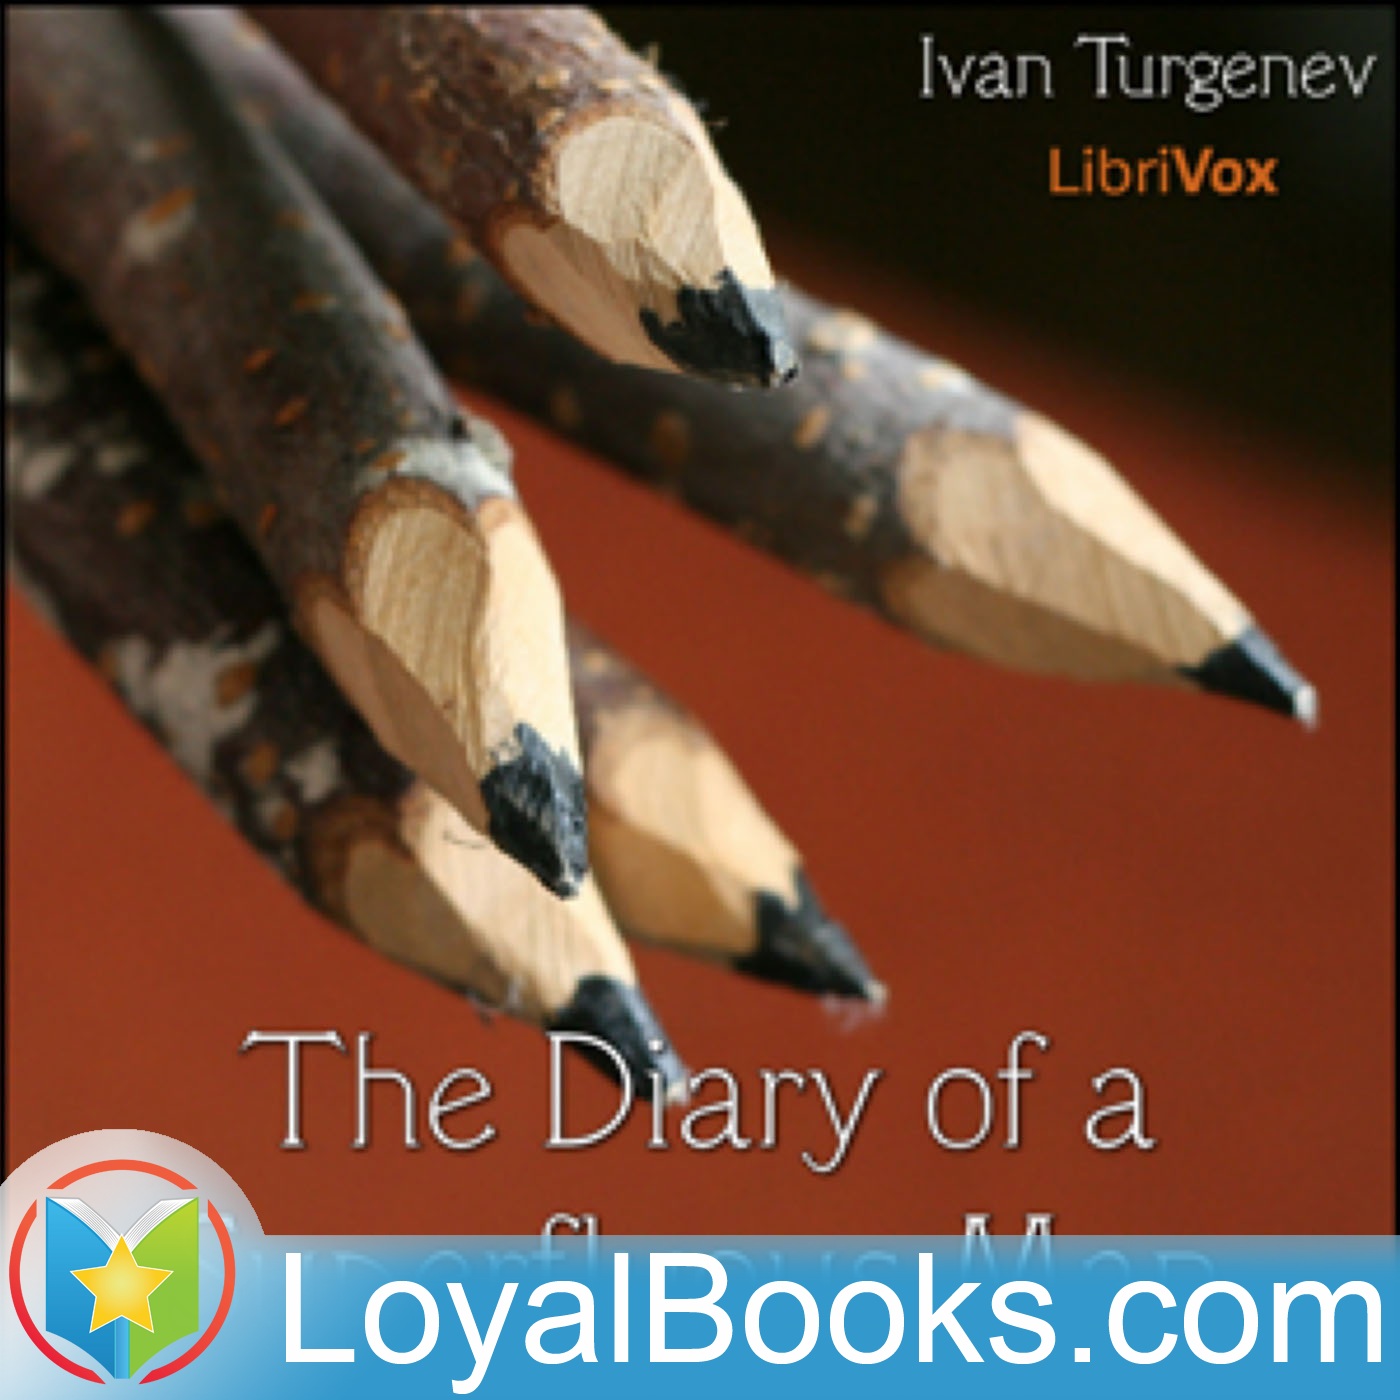 The Diary of a Superfluous Man by Ivan S. Turgenev